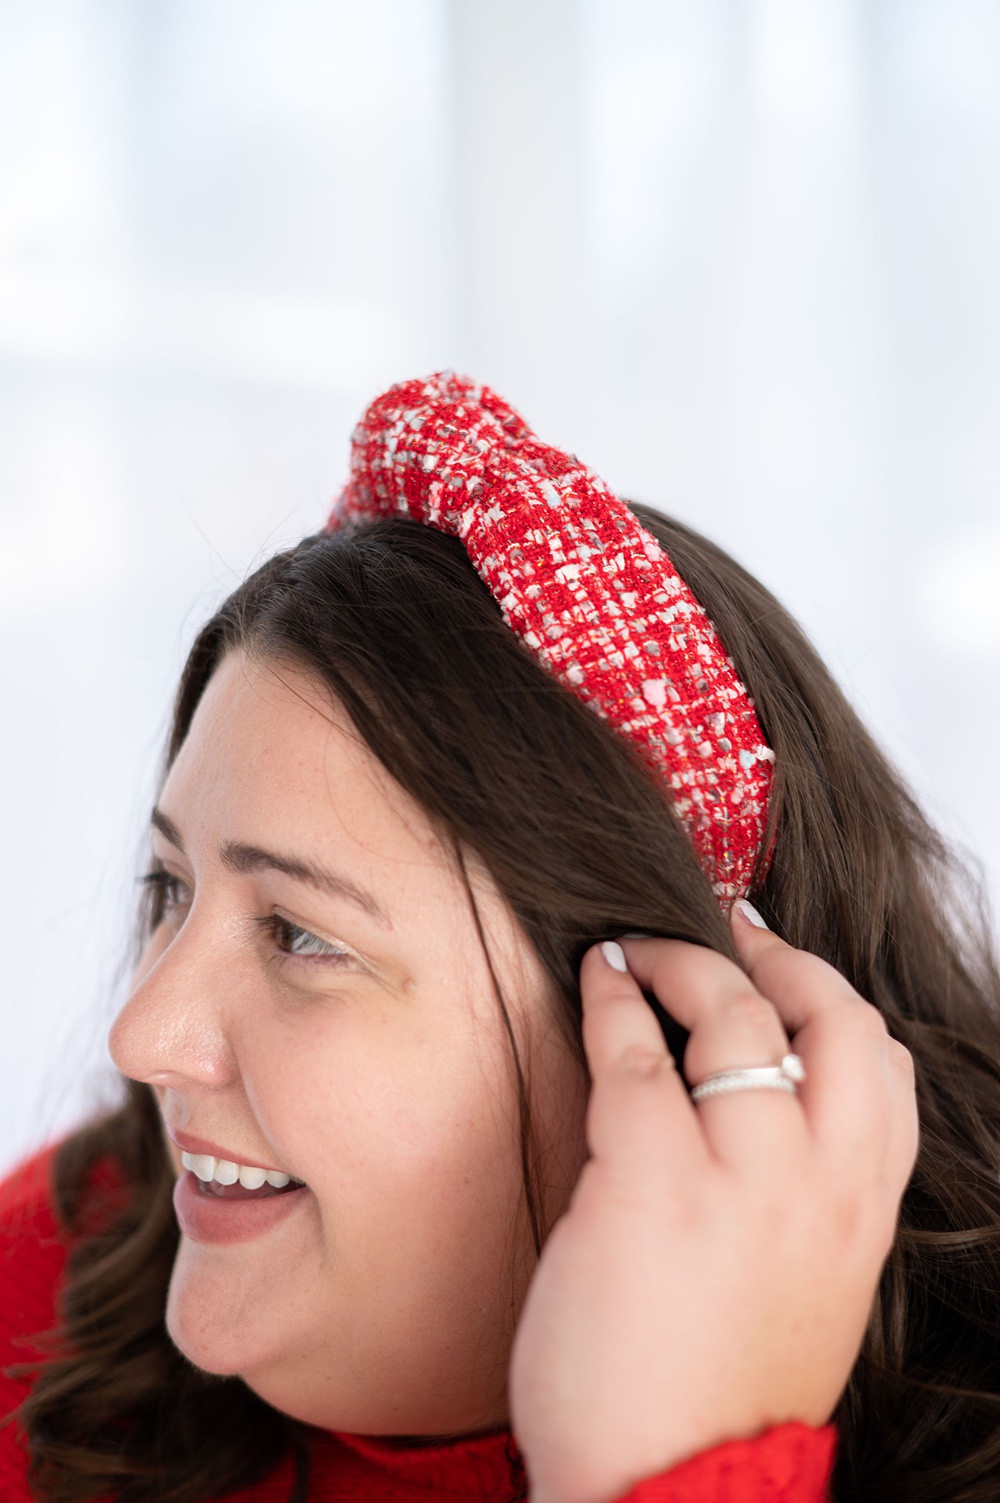 A woman wearing a red headband smiling while tucking her hair to her ears. She's looking to the left.